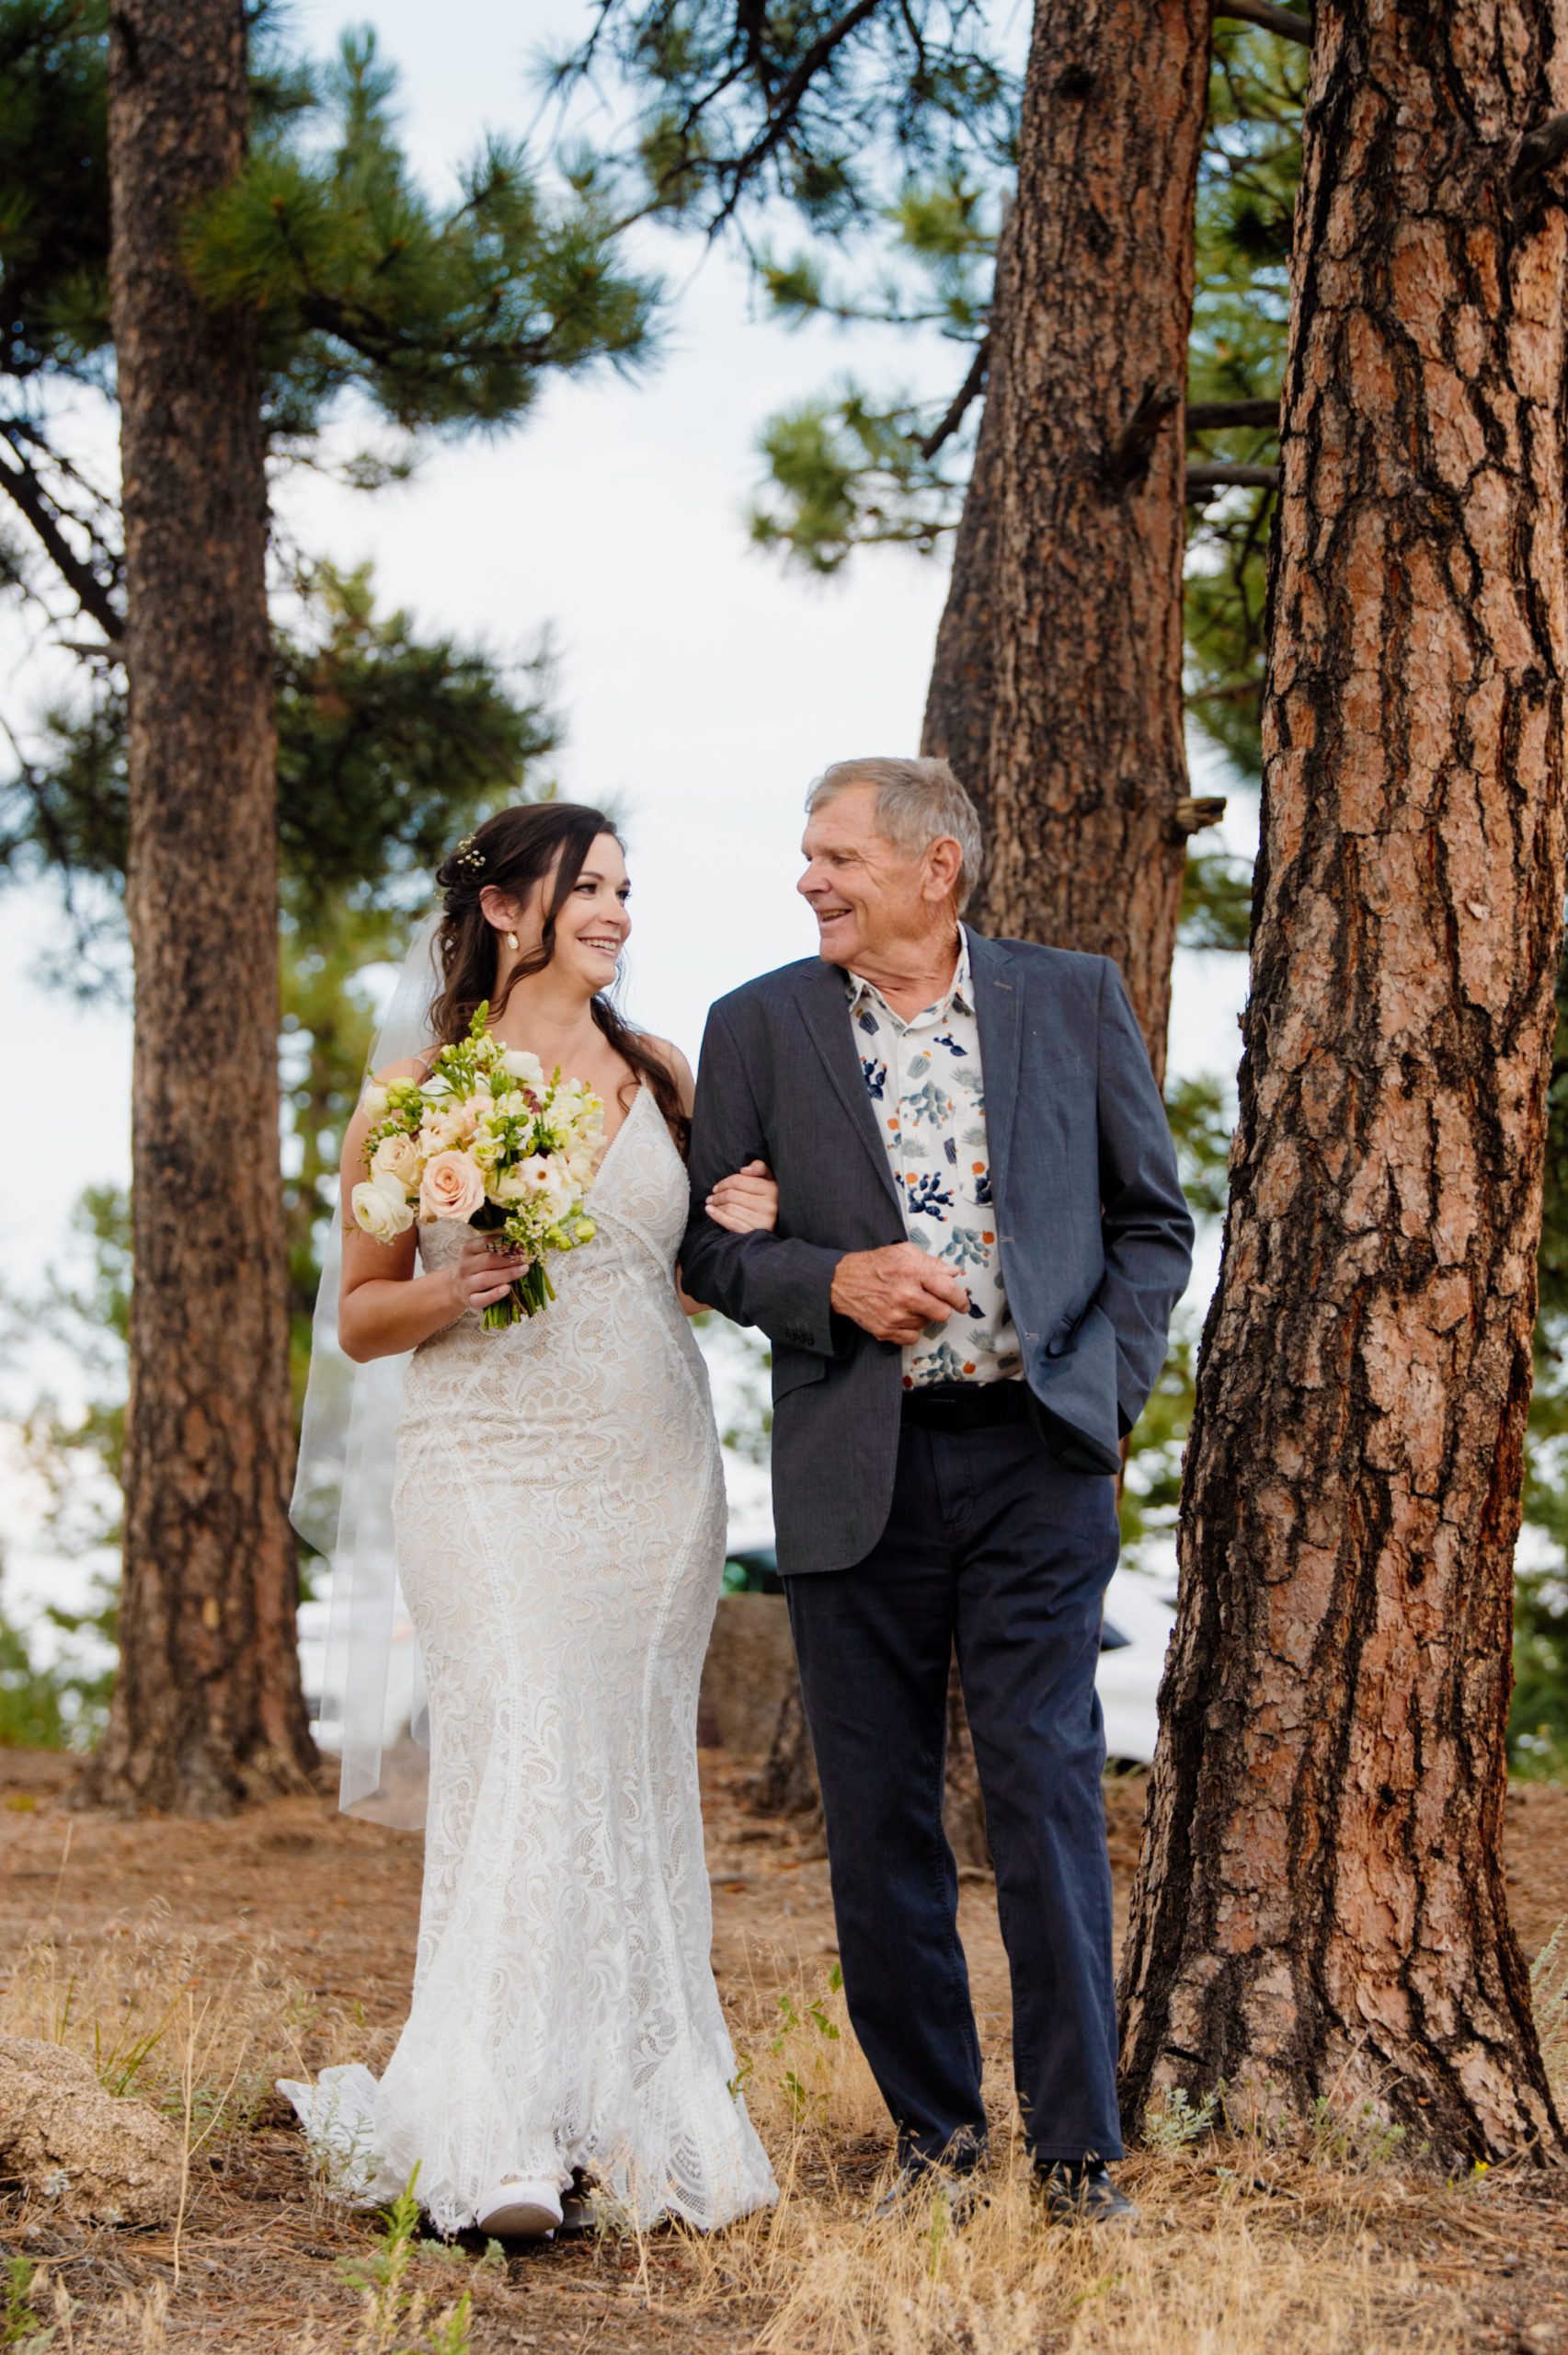 Jaylea's father walks her down the aisle during her Artist Point elopement ceremony.